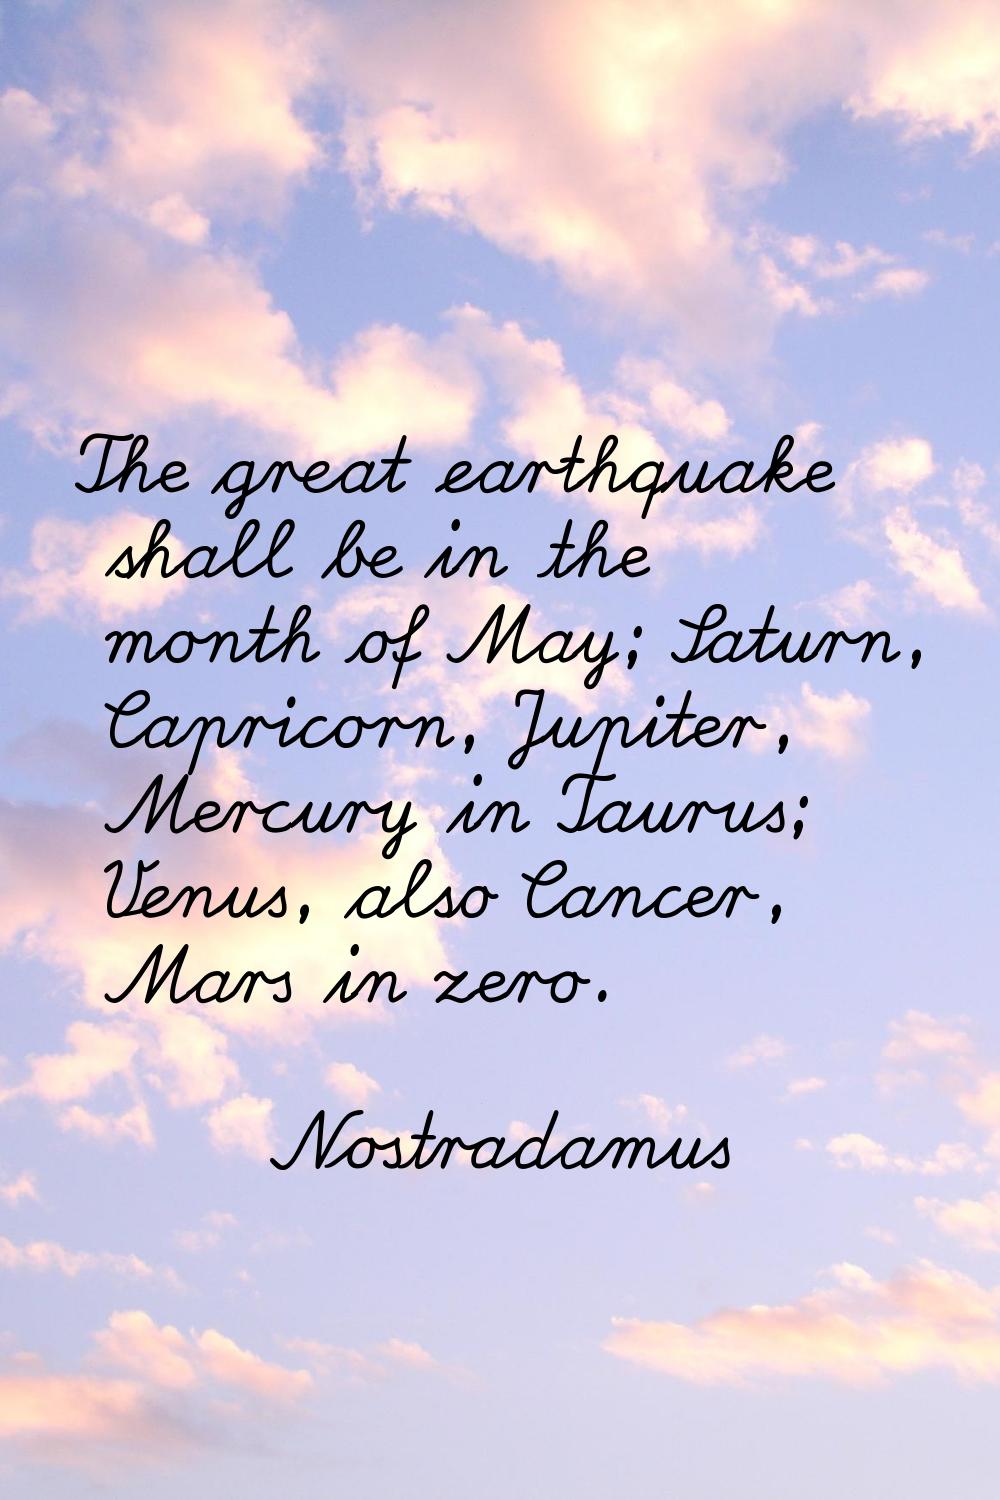 The great earthquake shall be in the month of May; Saturn, Capricorn, Jupiter, Mercury in Taurus; V